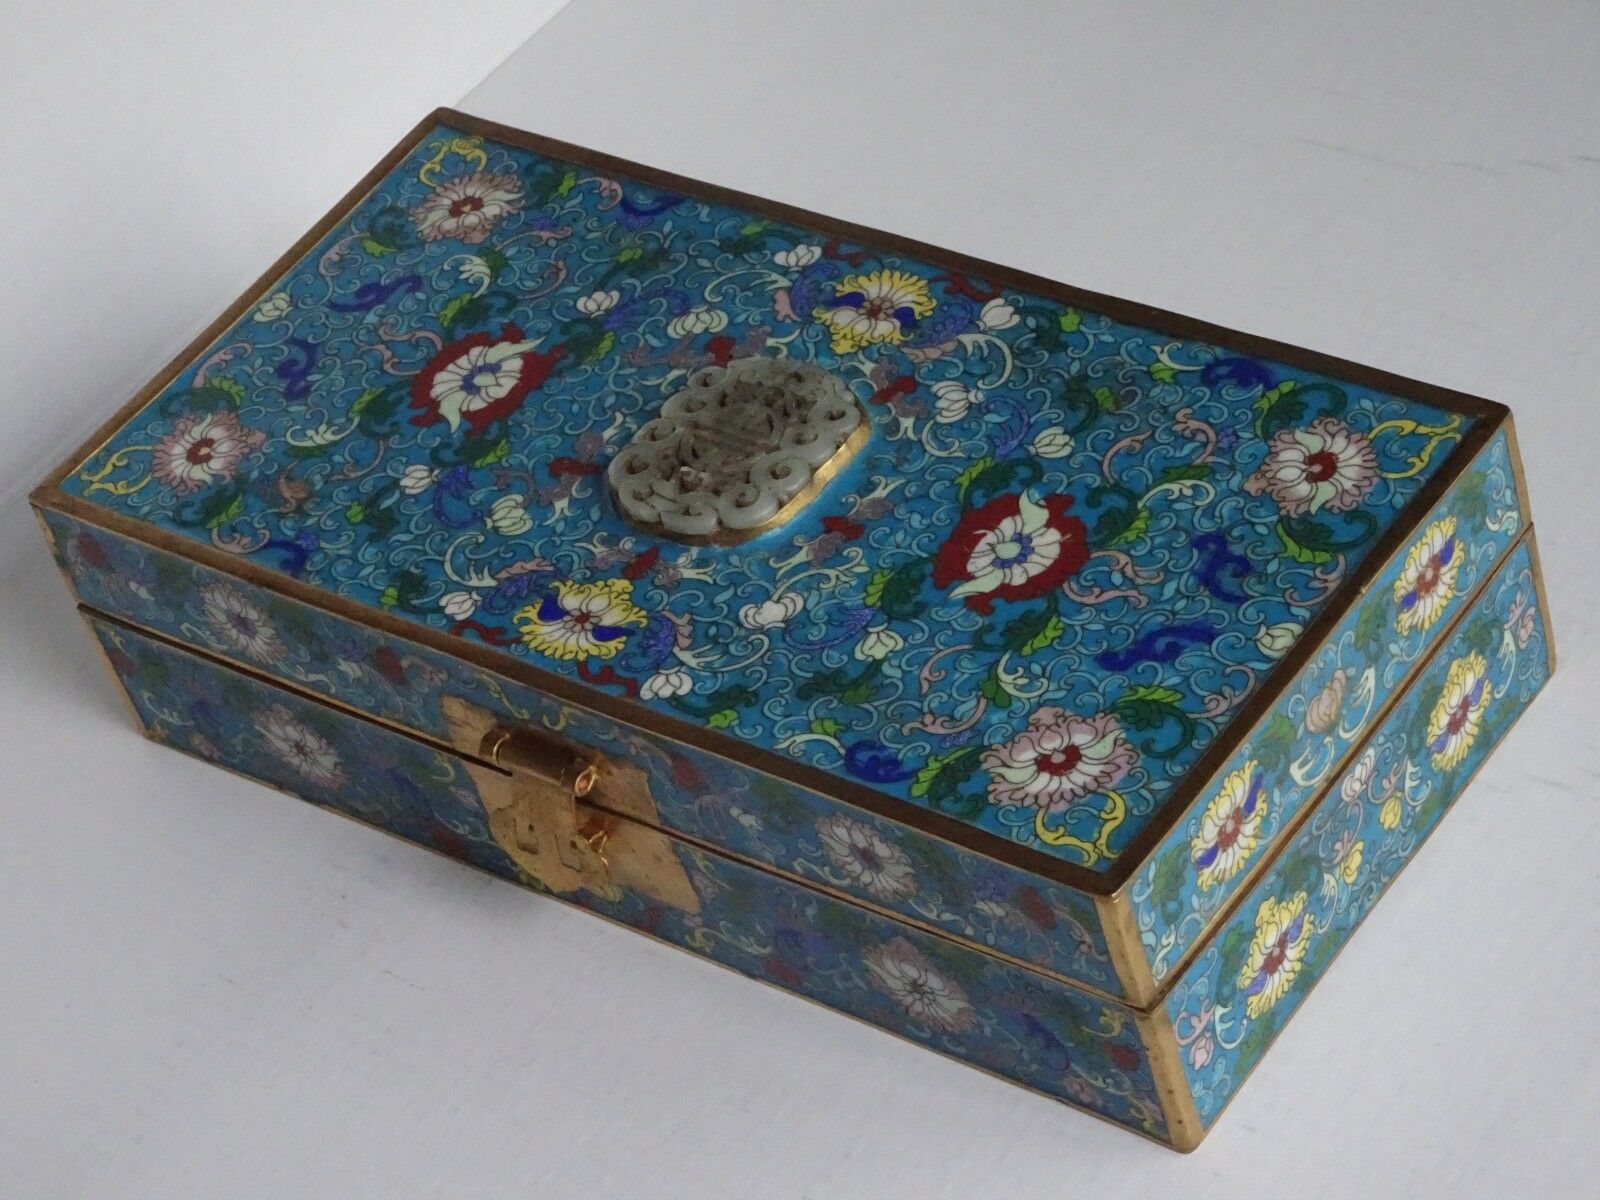 19th Century Antique Chinese Cloisonne And Carved Jade Plaque Box Lotus Petal